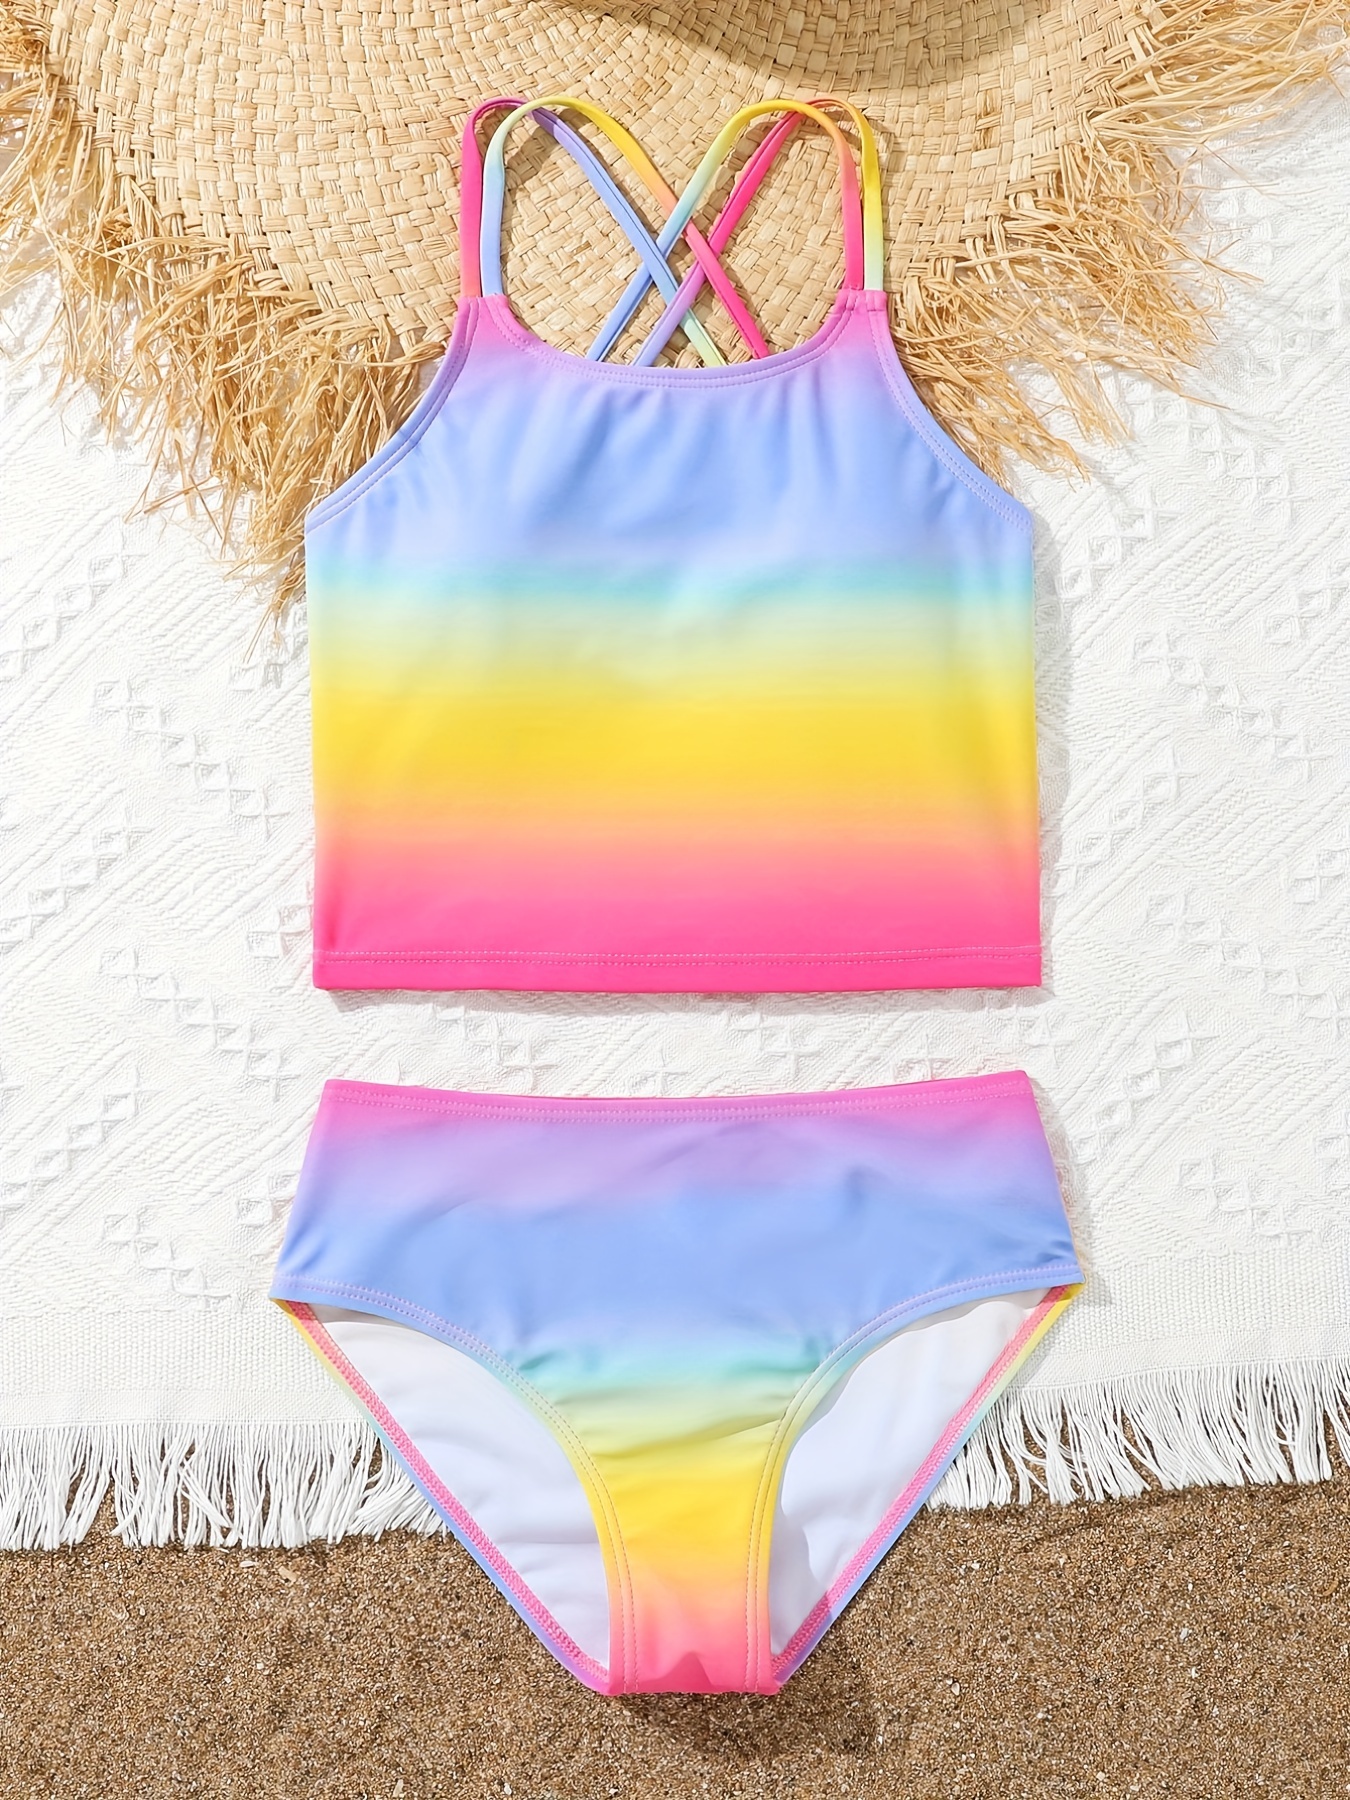 Girl's Tie-dye Pattern Bikini Set 2pcs, Stretchy Bathing Suit, Casual Kid's  Swimsuit For Summer Beach Vacation